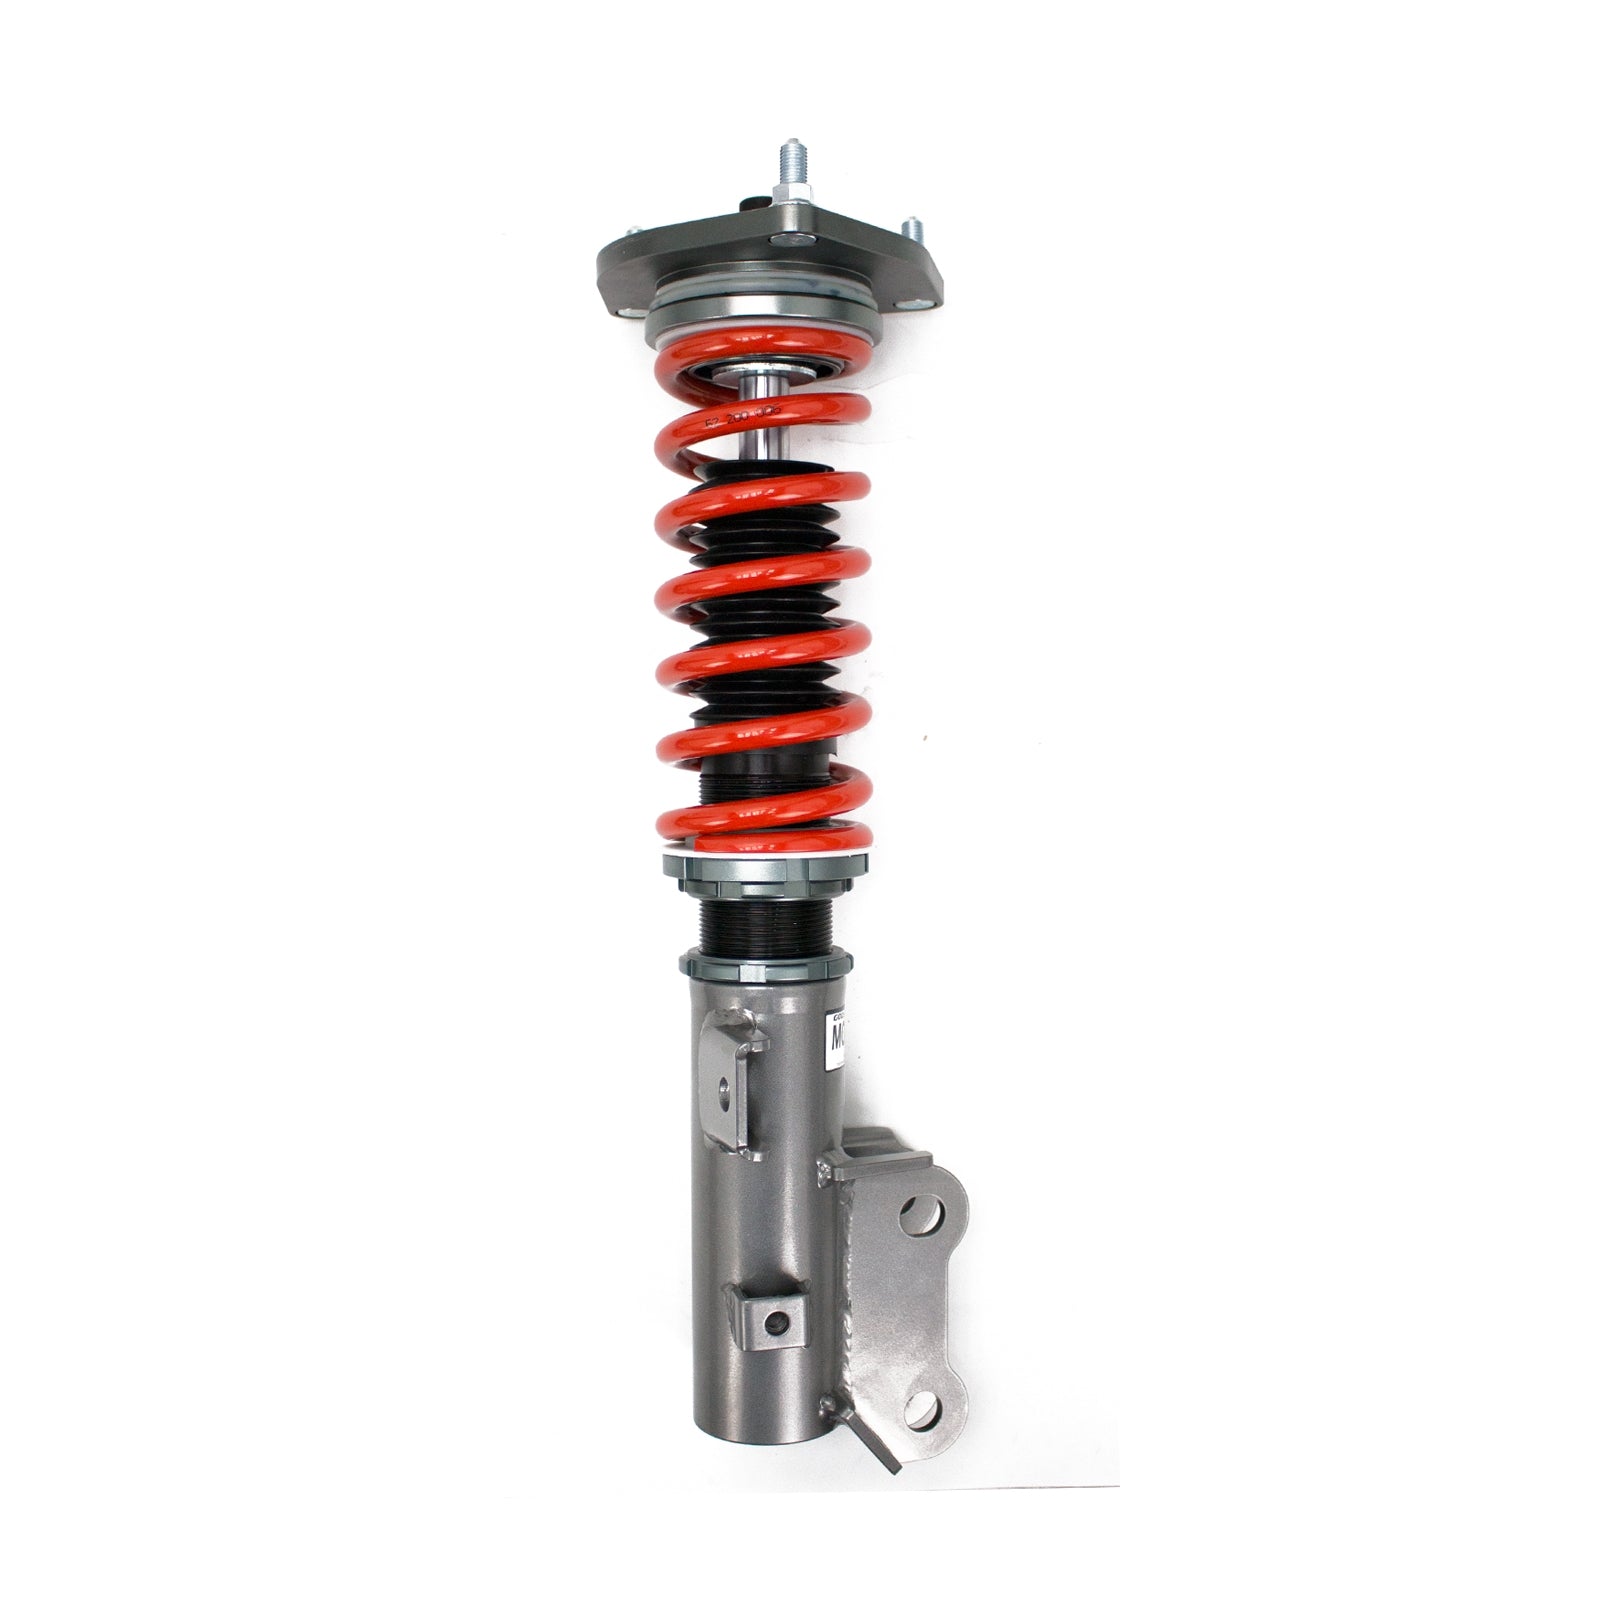 Godspeed MRS1421 MonoRS Coilover Lowering Kit, 32 Damping Adjustment, Ride Height Adjustable